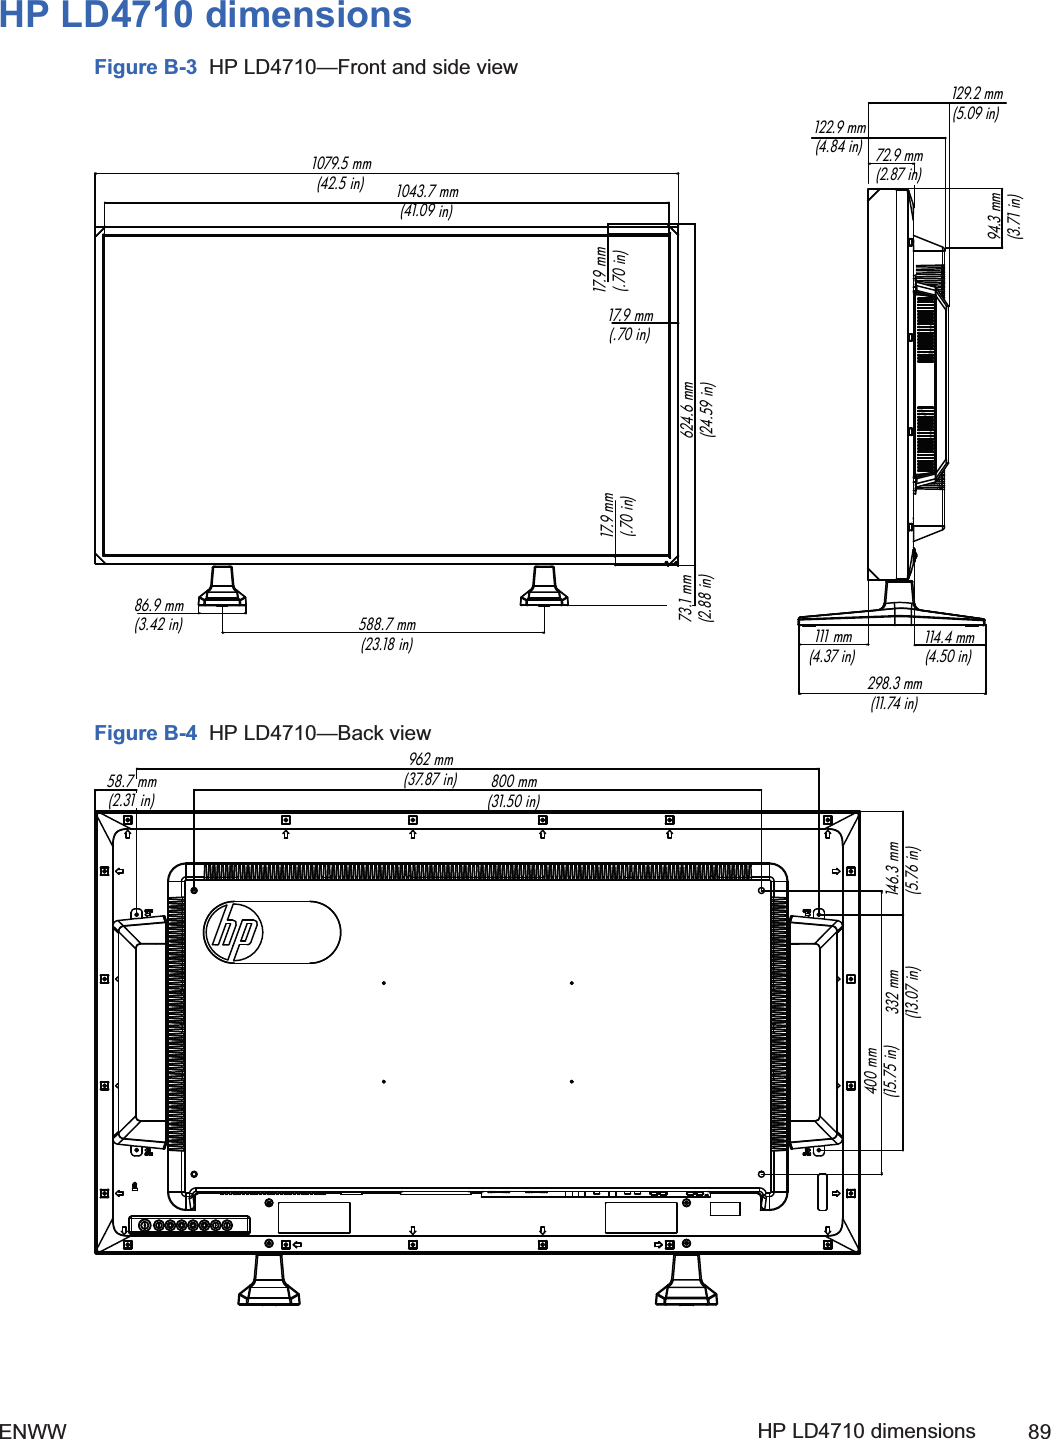 HP LD4710 dimensionsFigure B-3  HP LD4710—Front and side view1079.5 mm  (42.5 in) 1043.7 mm  (41.09 in)588.7 mm  (23.18 in)86.9 mm  (3.42 in)17.9 mm  (.70 in)17.9 mm  (.70 in)624.6 mm  (24.59 in)17.9 mm  (.70 in)73.1 mm  (2.88 in)129.2 mm  (5.09 in)122.9 mm  (4.84 in)94.3 mm  (3.71 in)111 mm  (4.37 in)114.4 mm  (4.50 in)298.3 mm  (11. 74  i n )72.9 mm  (2.87 in)Figure B-4  HP LD4710—Back view58.7 mm  (2.31 in)962 mm  (37.87 in) 800 mm  (31.50 in)146.3 mm  (5.76 in)332 mm  (13.07 in)400 mm  (15.75 in)ENWW HP LD4710 dimensions 892ndDraft